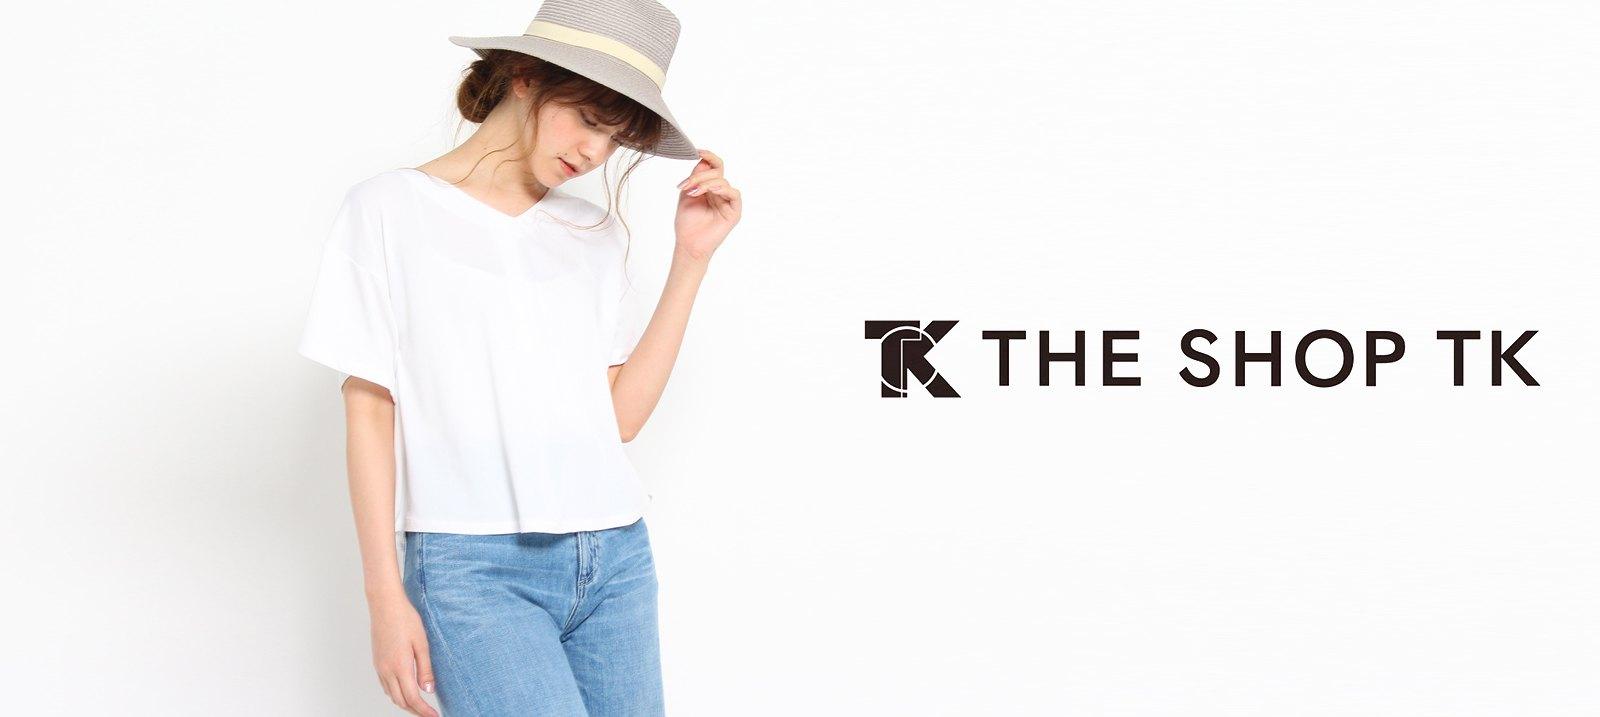 THE SHOP TK for women 